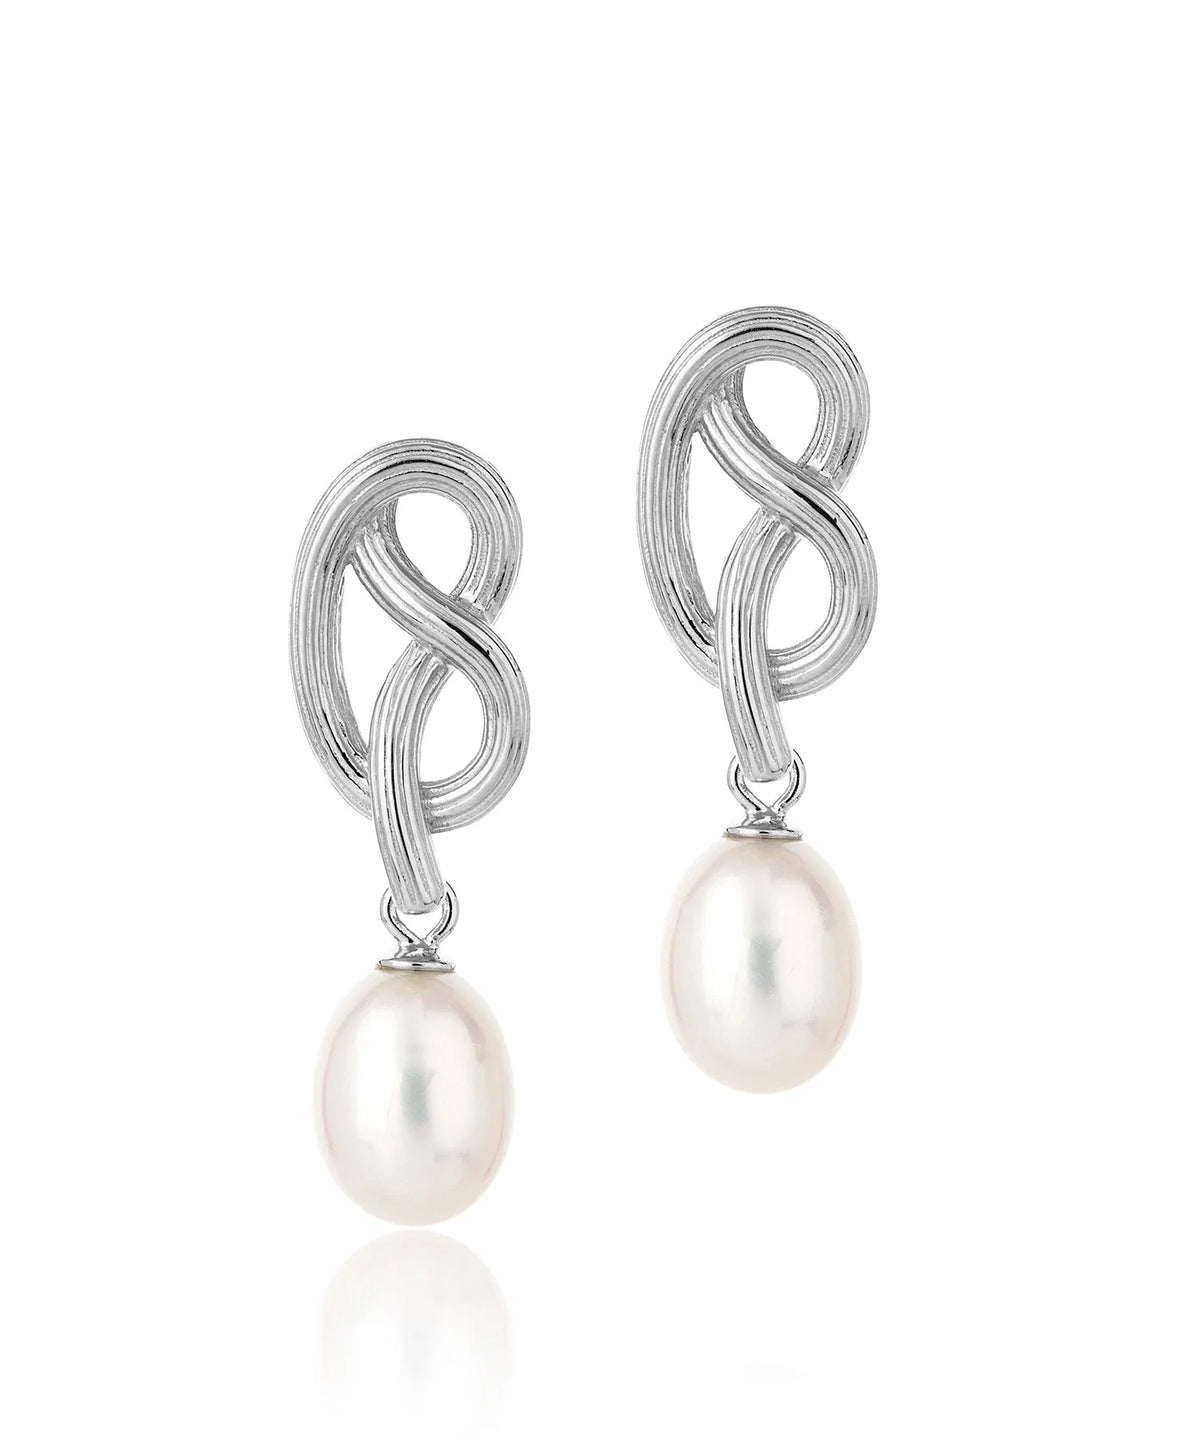 Silver twisted tubing earring with post and butterfly fastening and single pearl drop